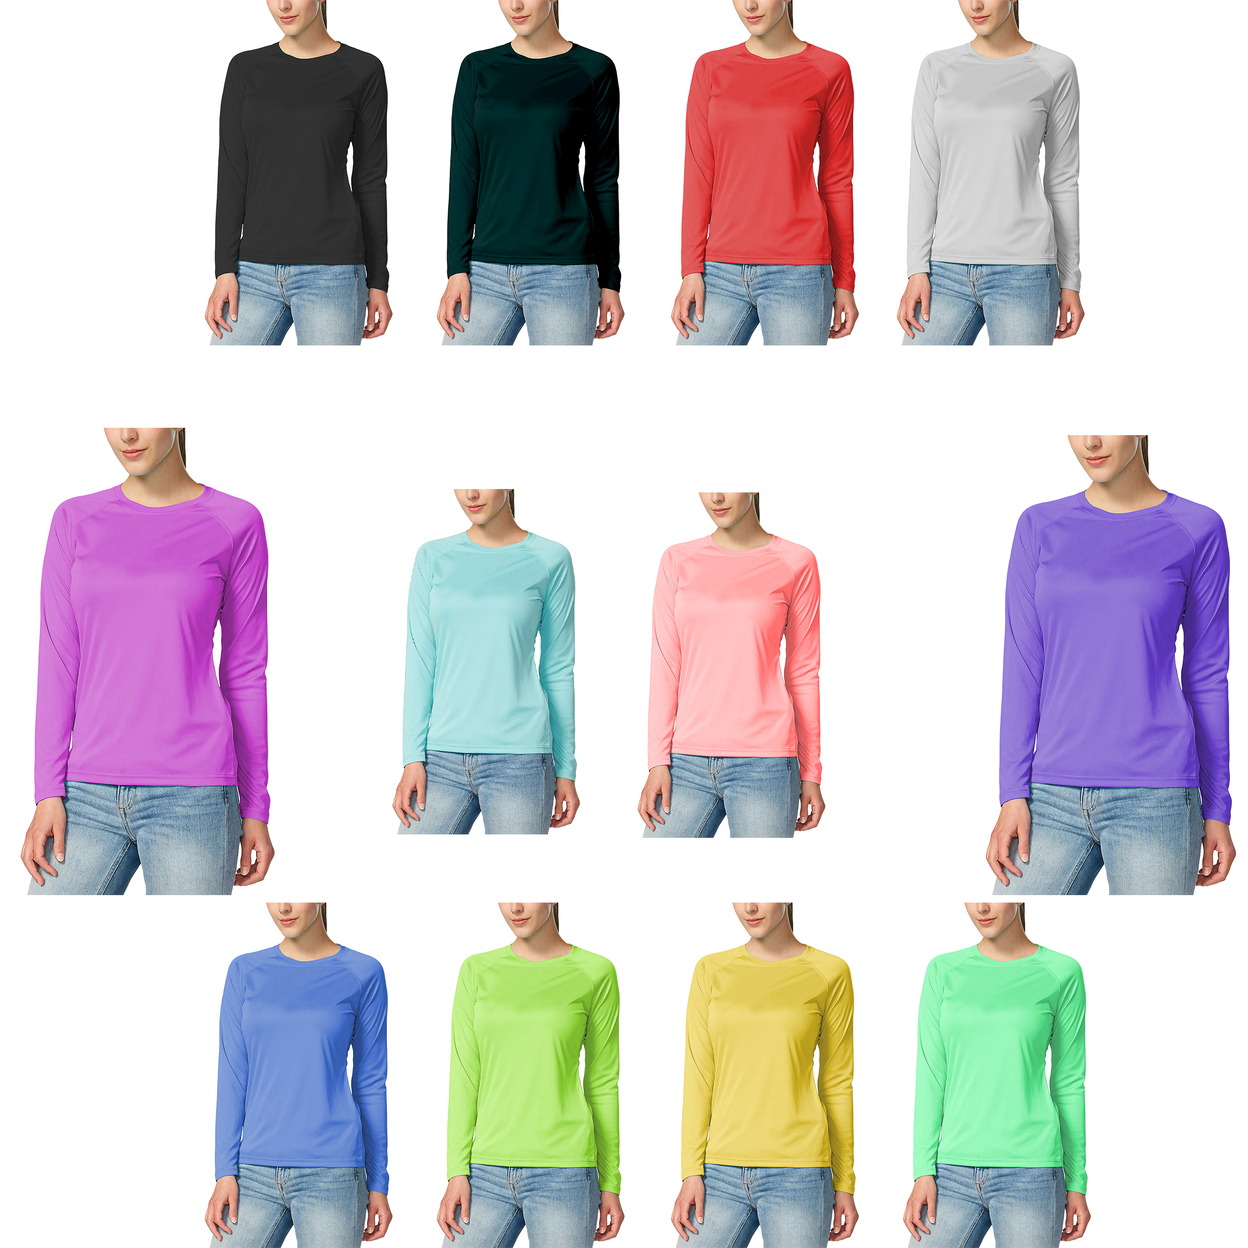 6-Pack: Women's Dri-Fit Moisture-Wicking Breathable Long Sleeve T-Shirt - Small